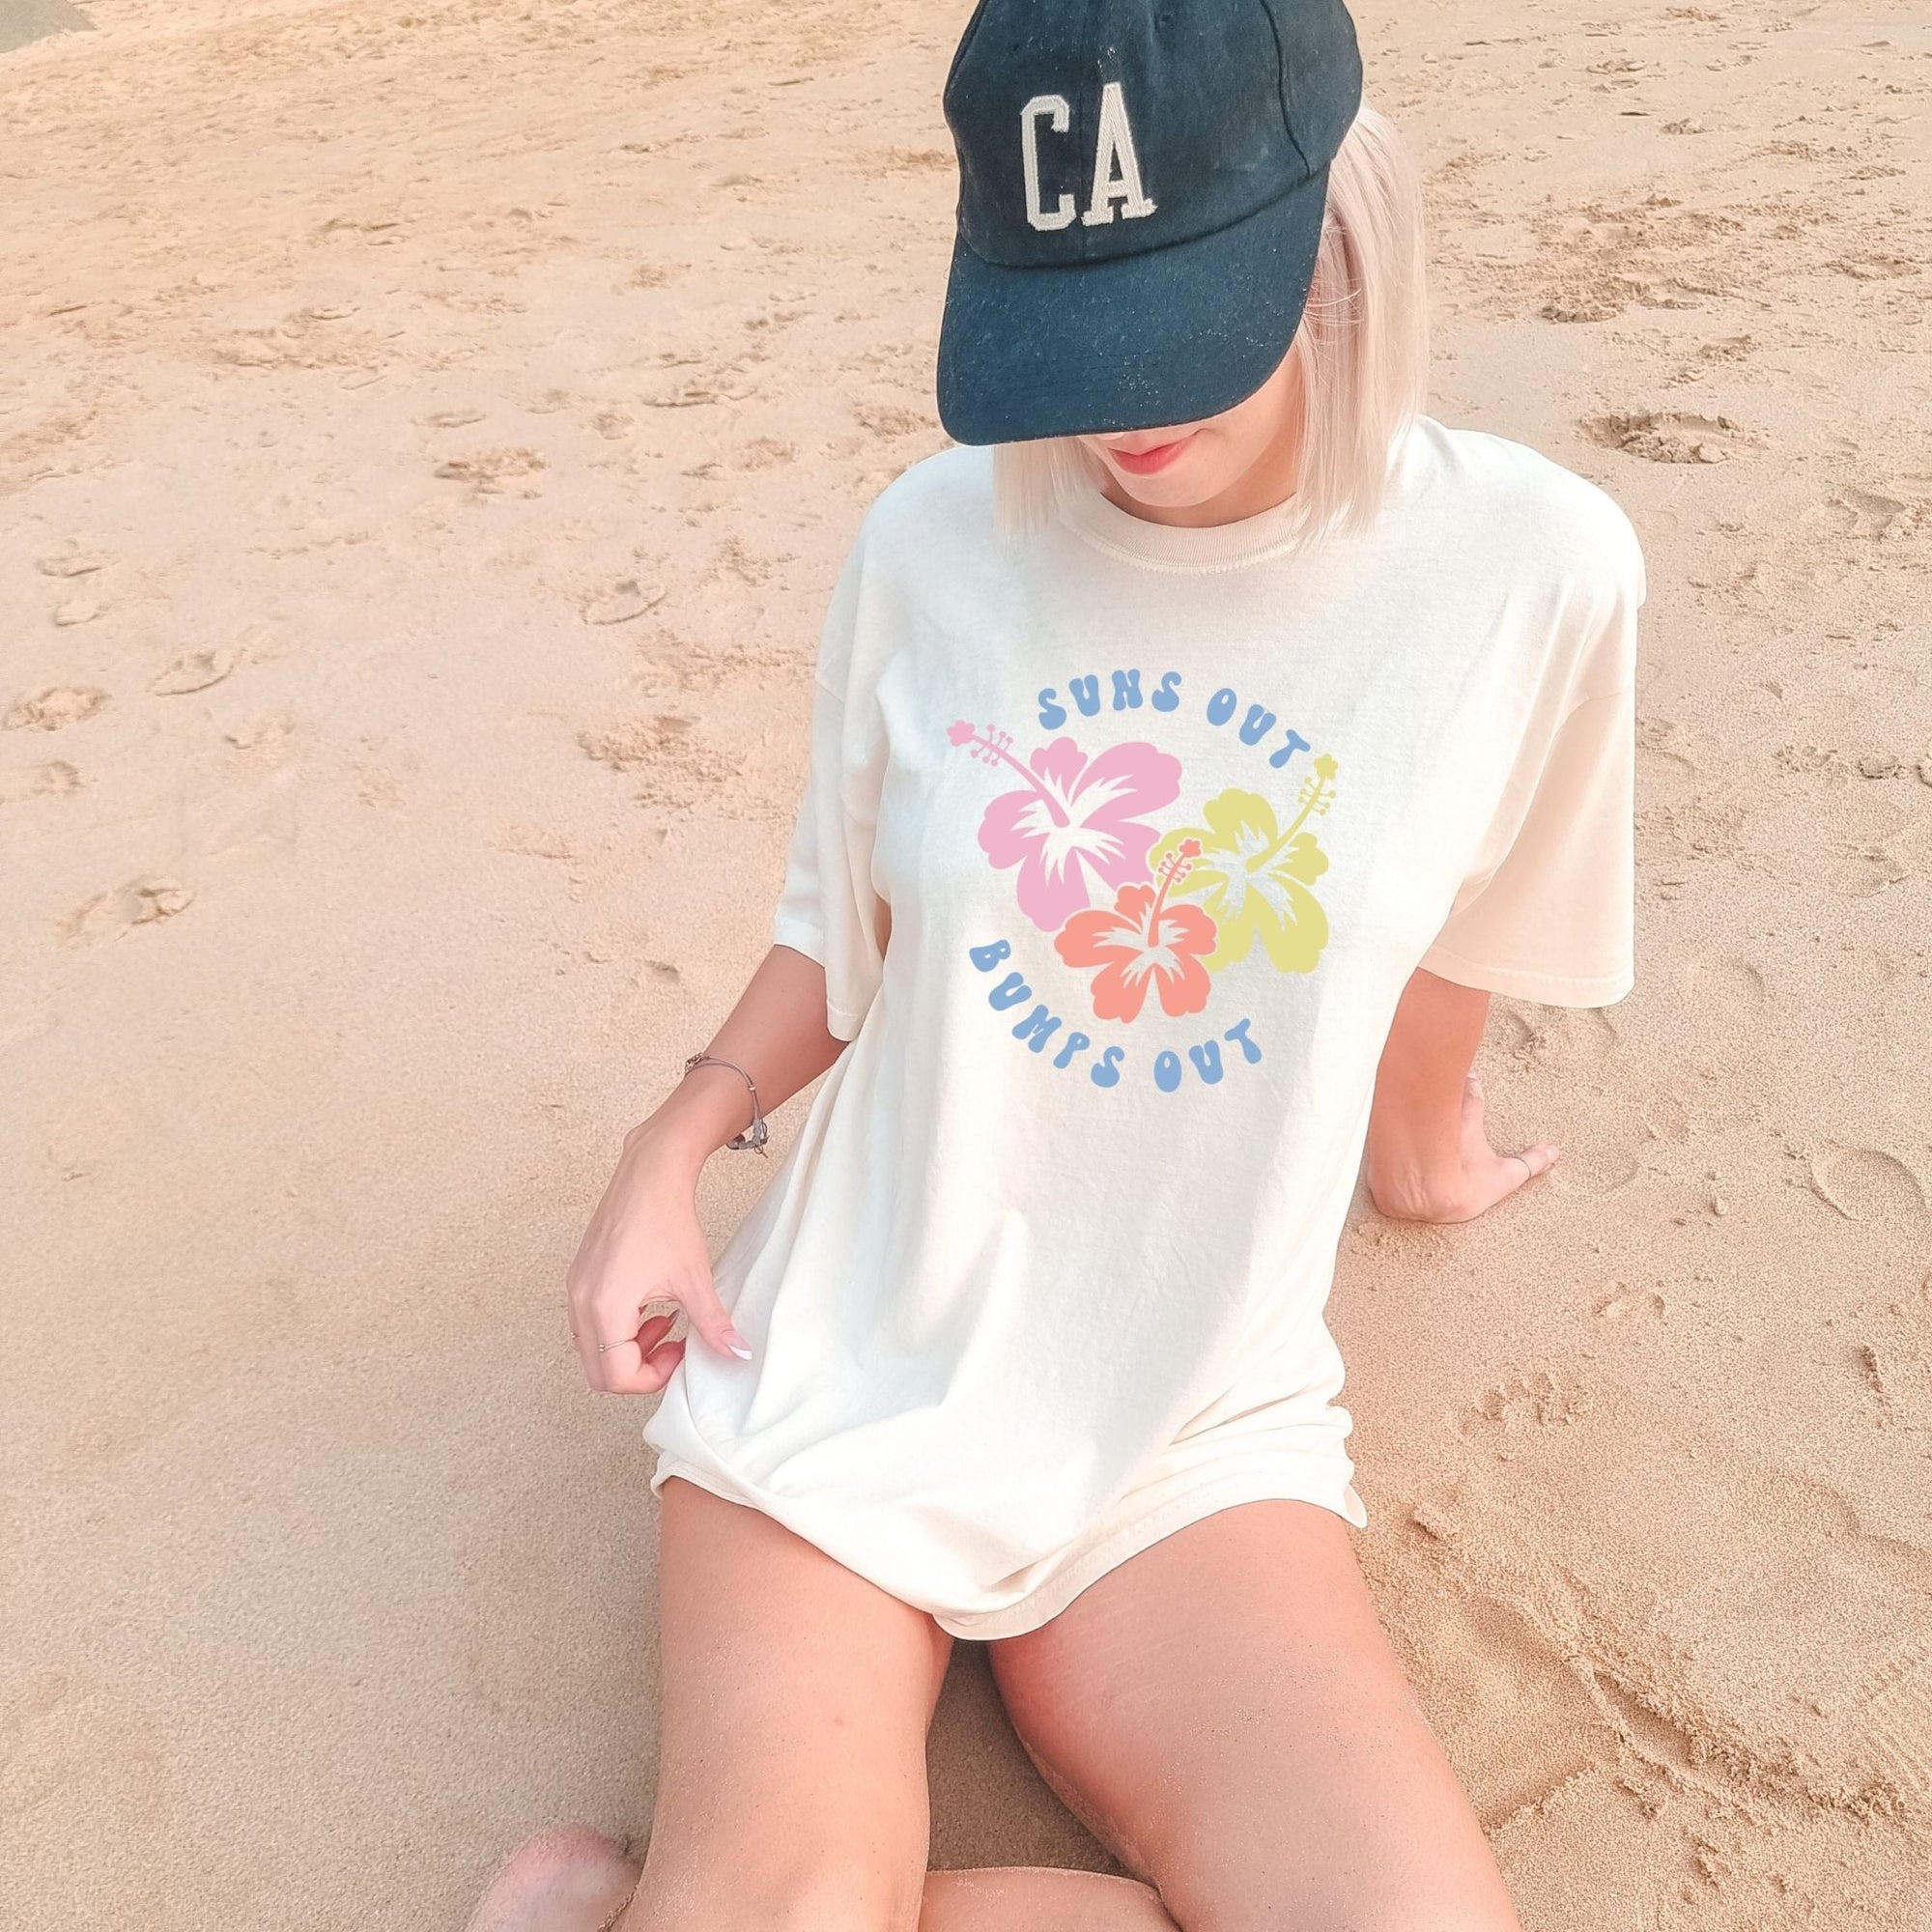 Suns Out Bumps Out Beach Tee - Mod Reveals